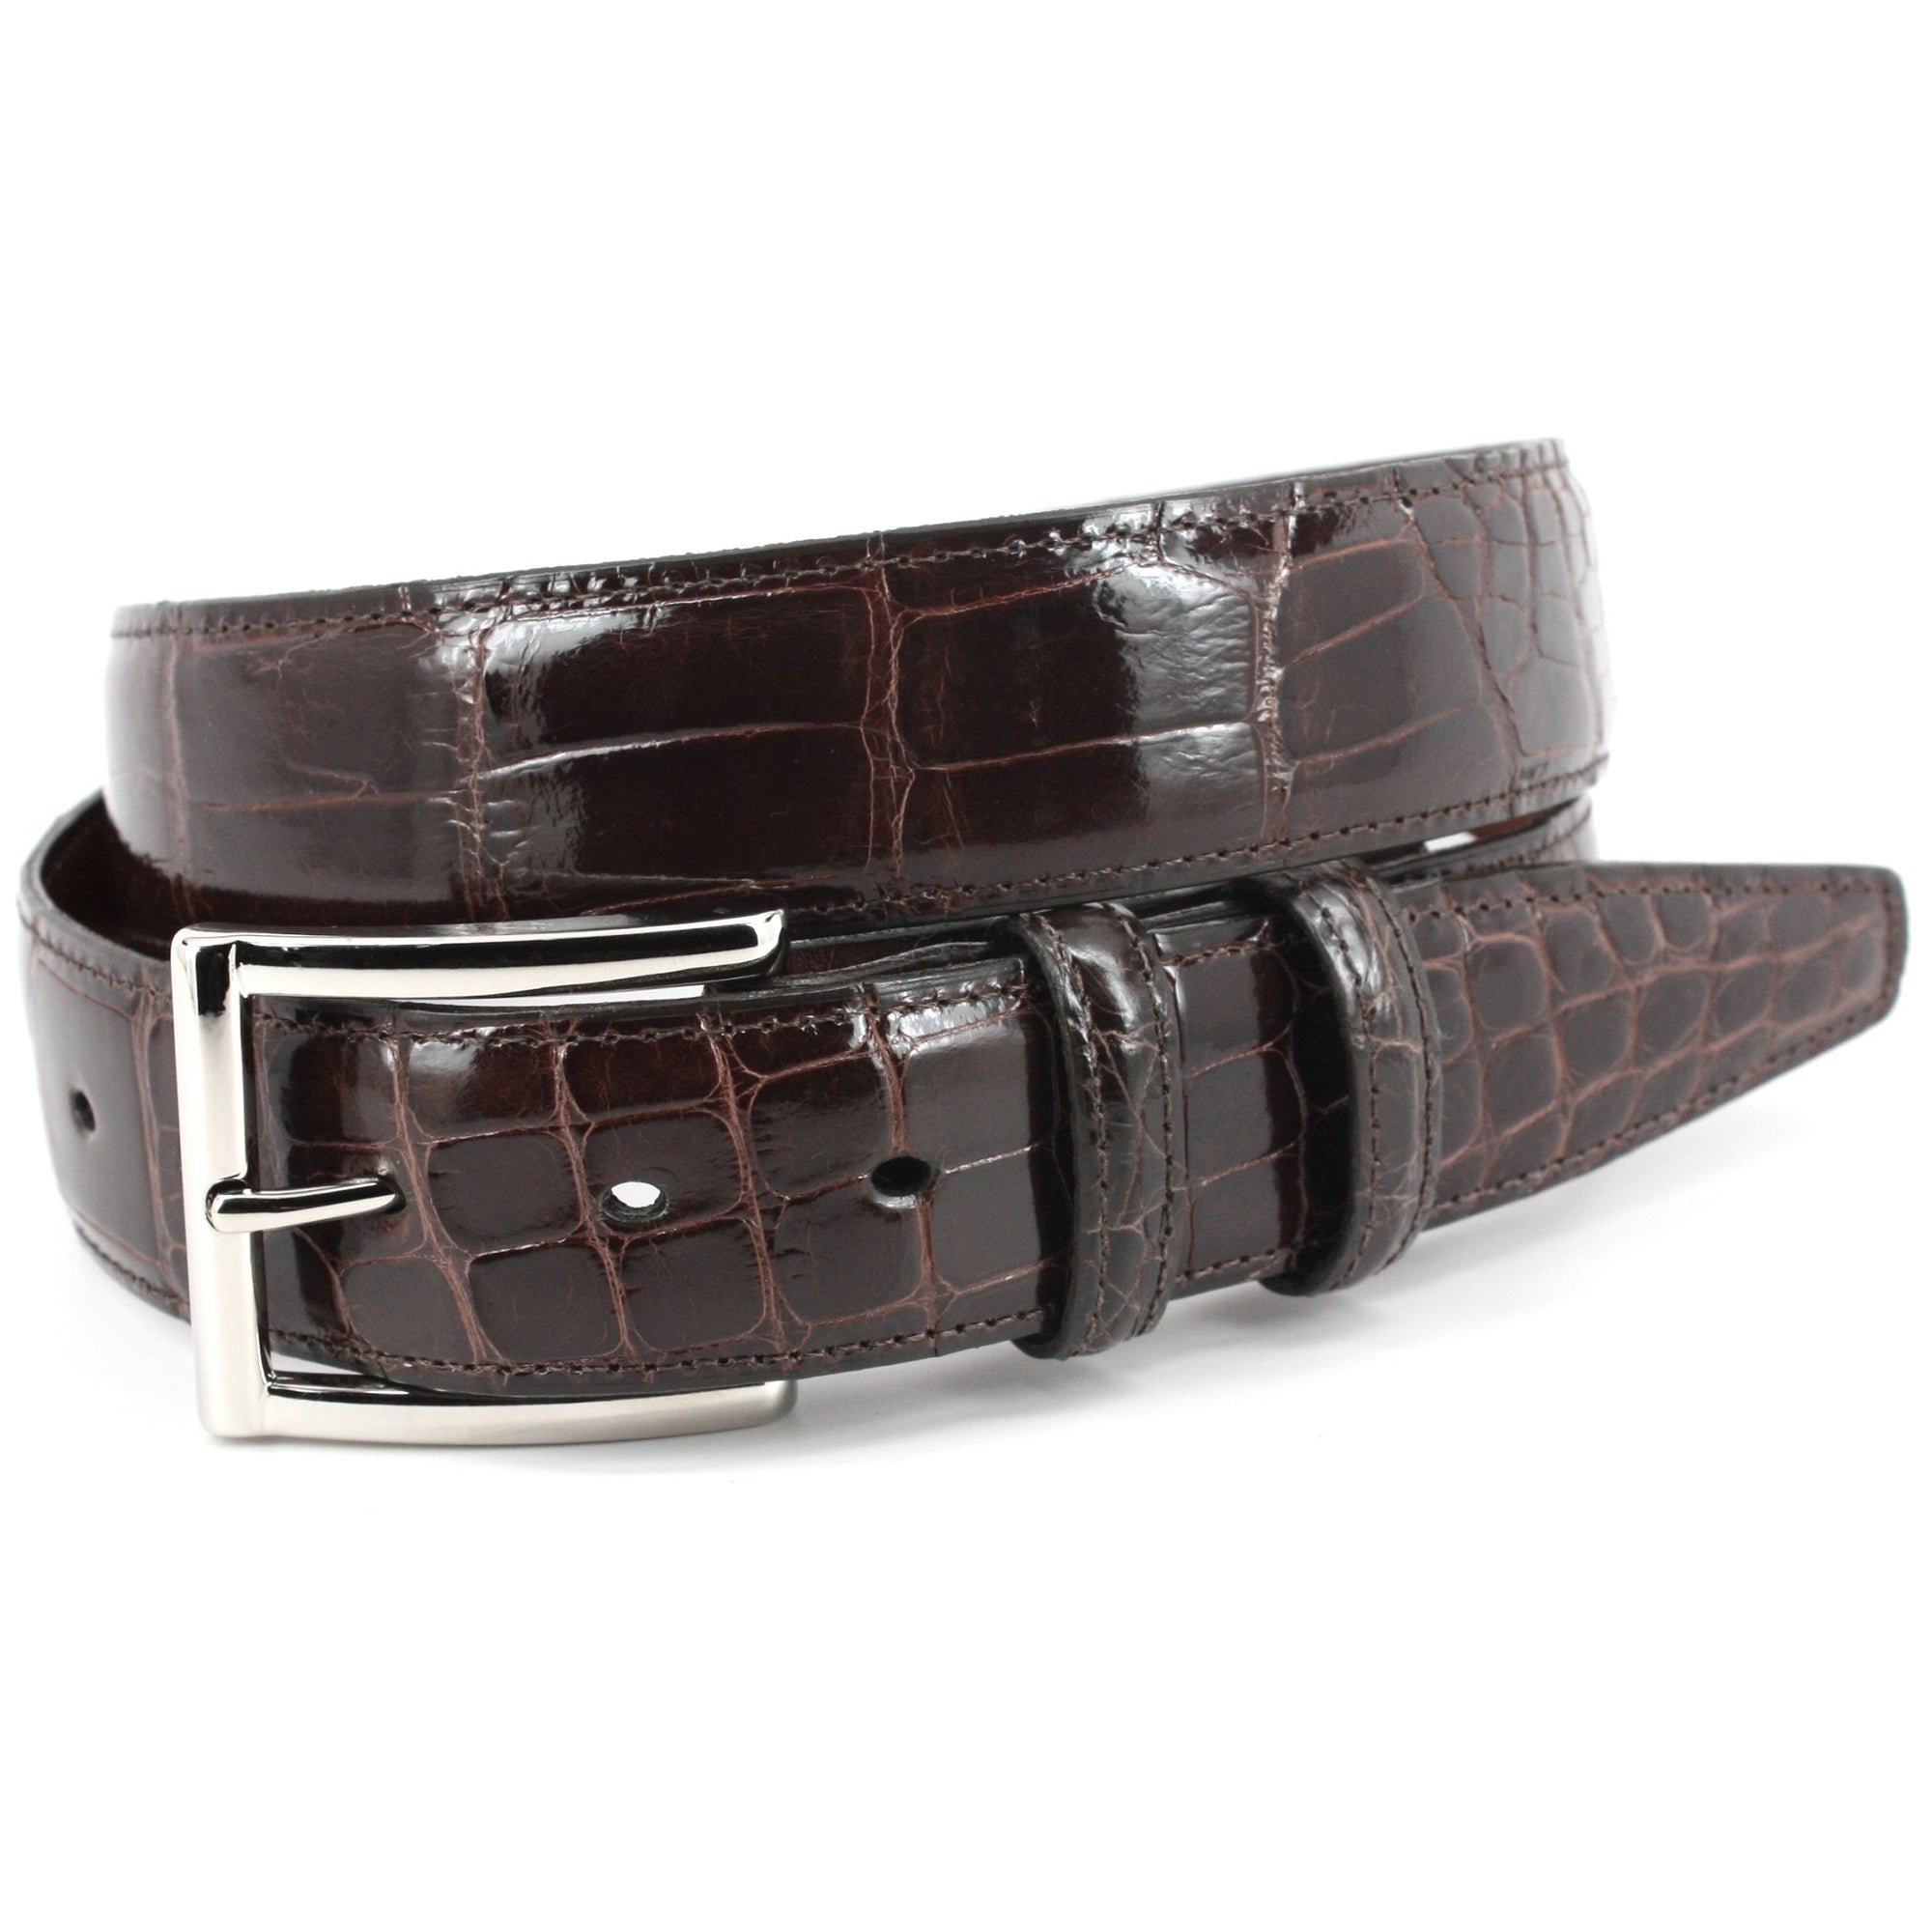 American Alligator Stitched Edge Belt in Brown by Torino Leather